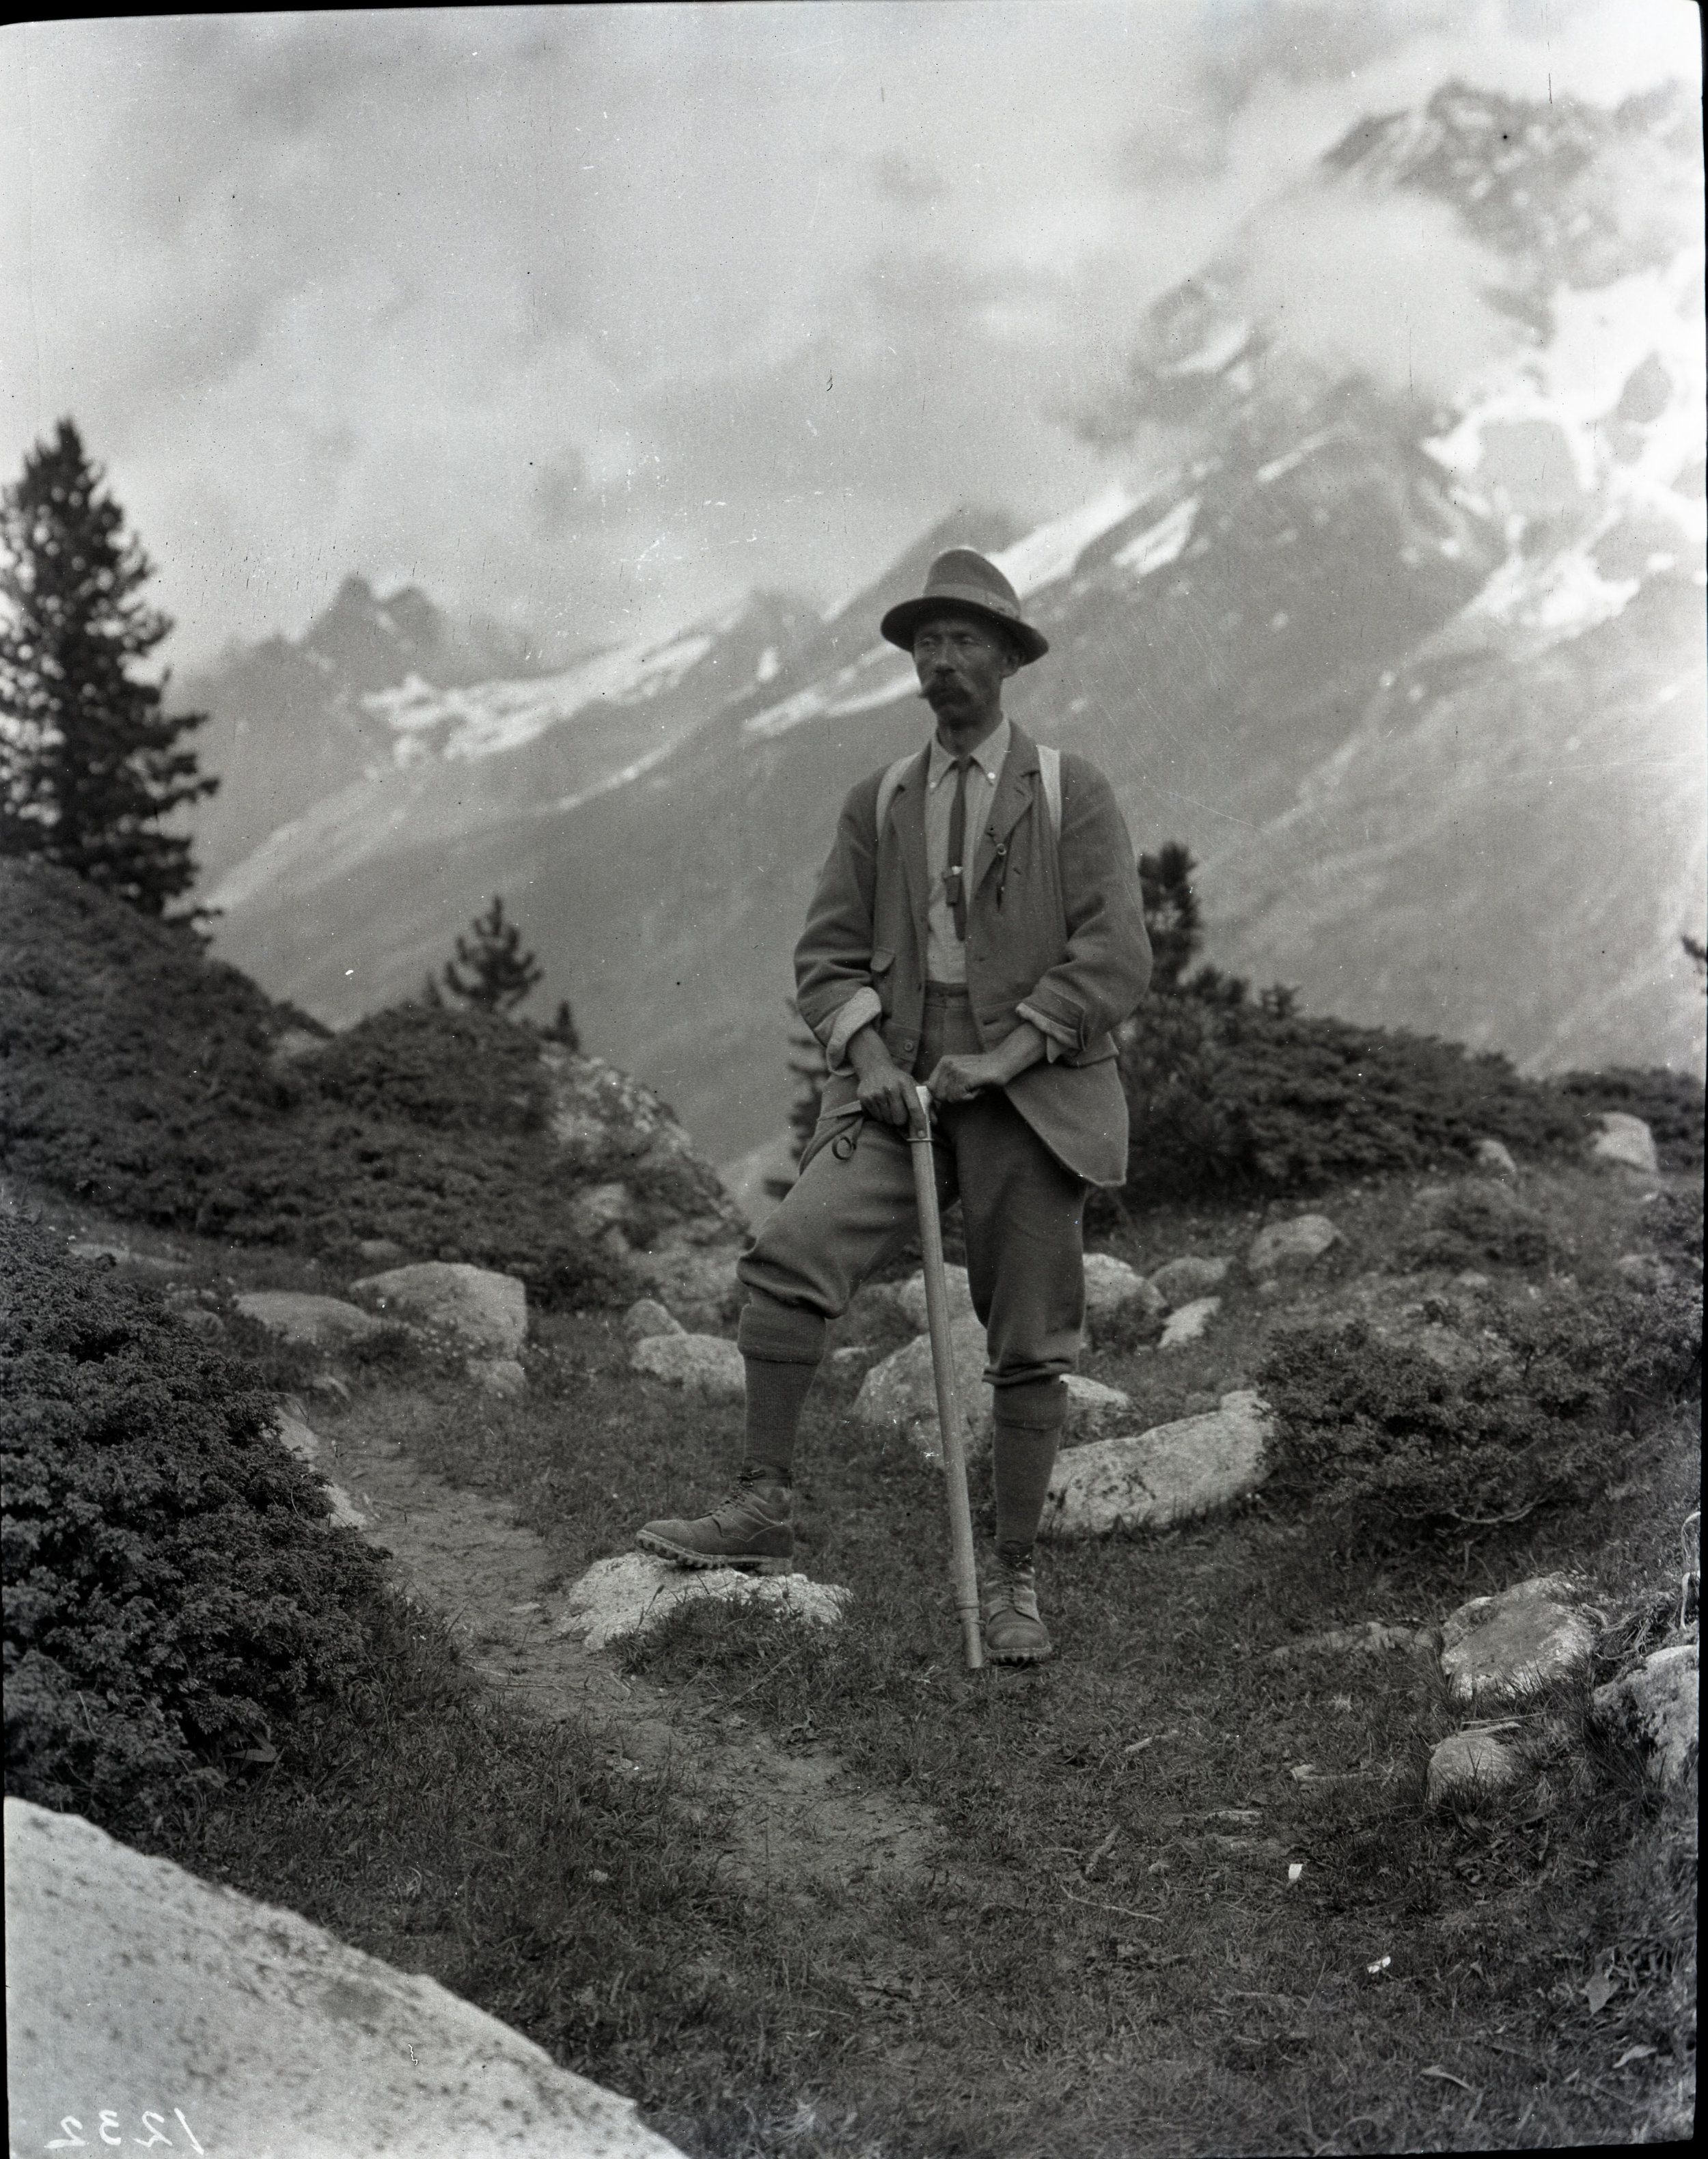  A mountaineer resting his hands on his ice axe while on the trail. From the Andrew James Gilmour collection 